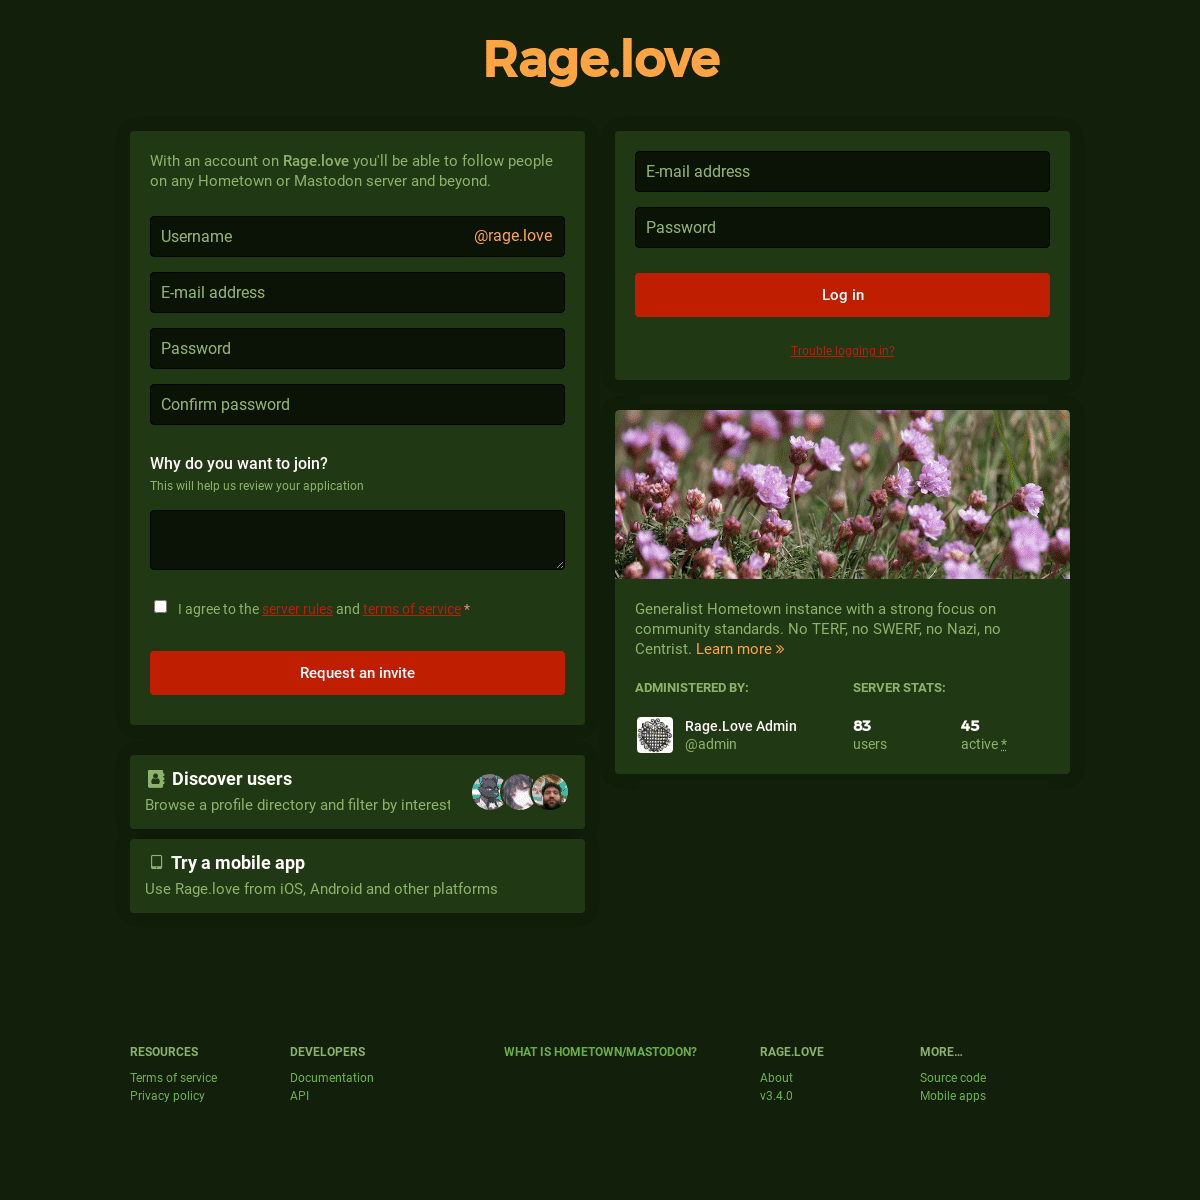 A complete backup of https://rage.love